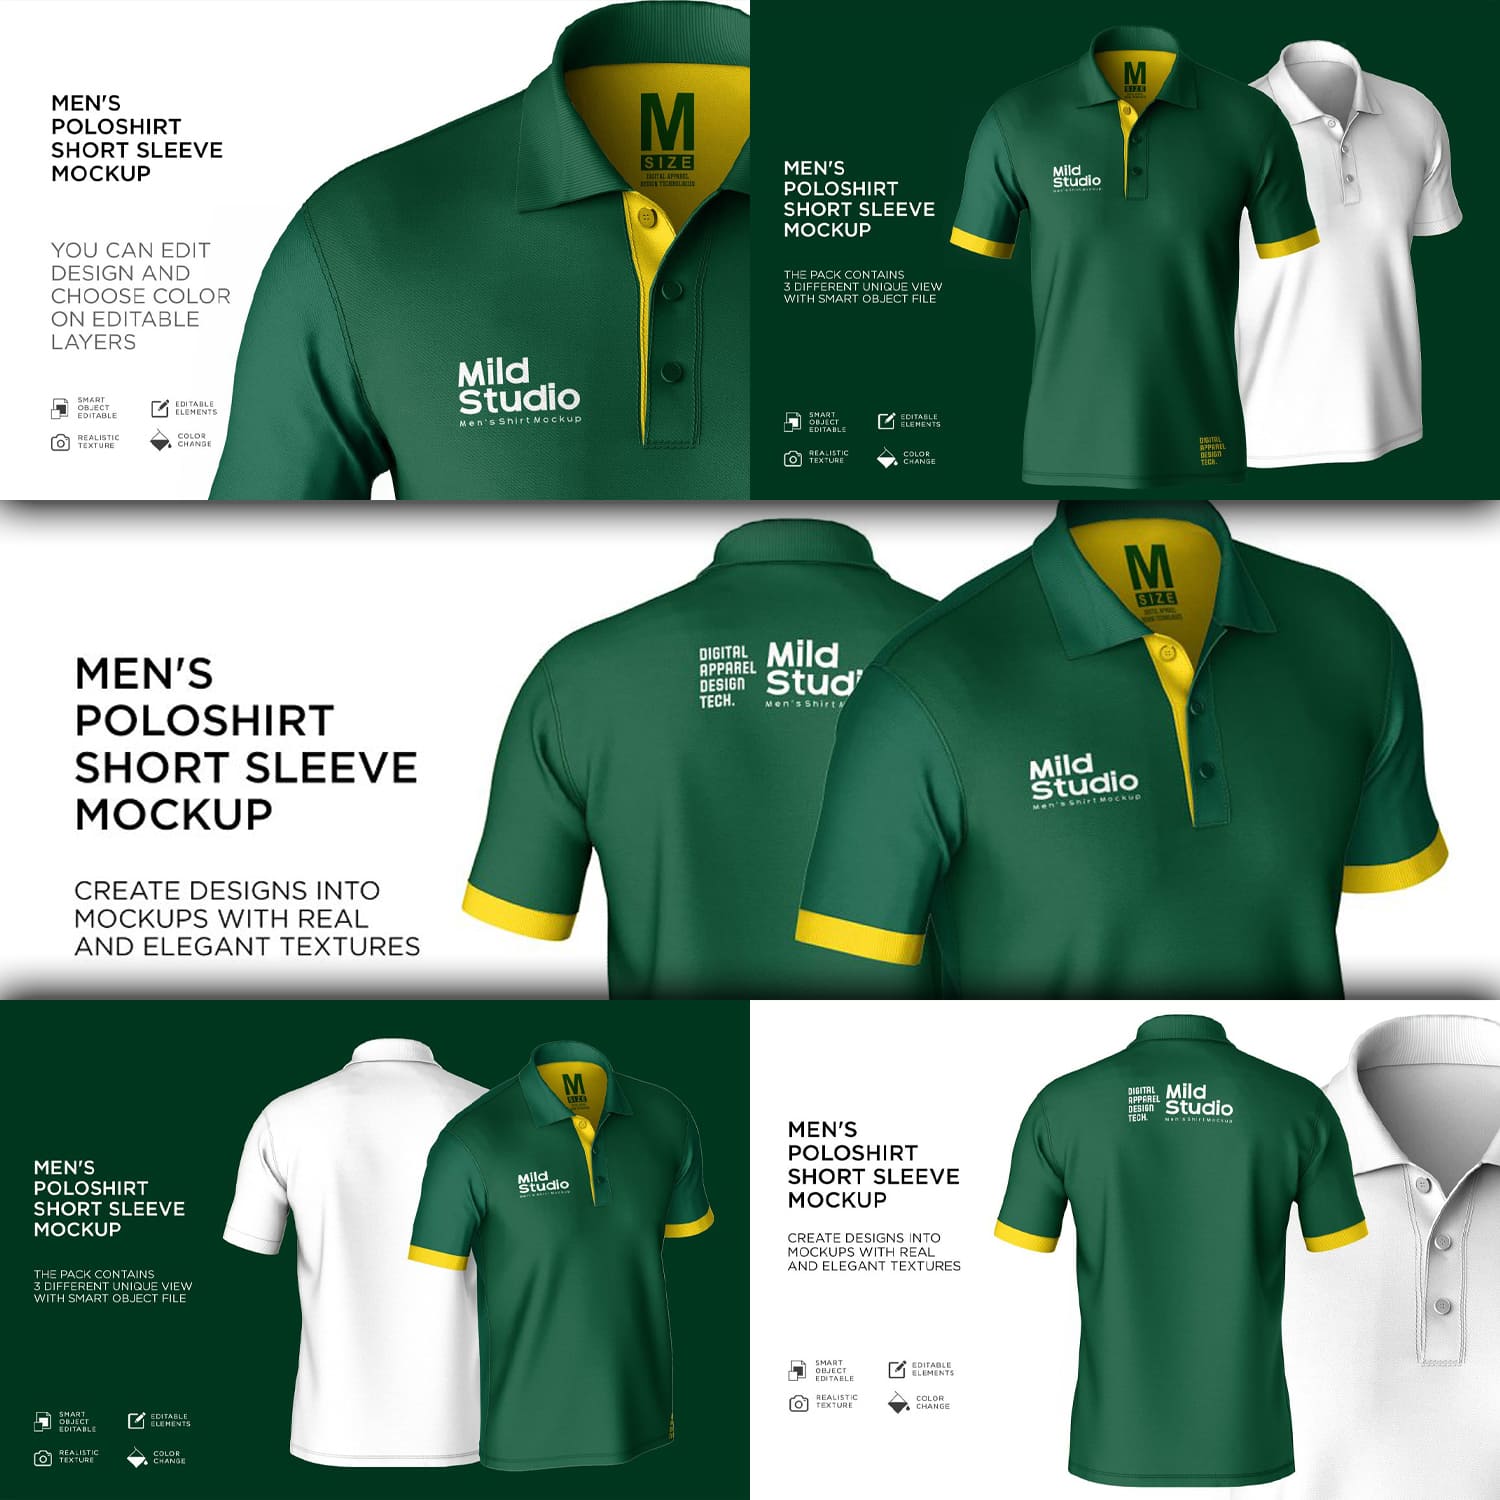 Men's t-shirts in green and white with logos.